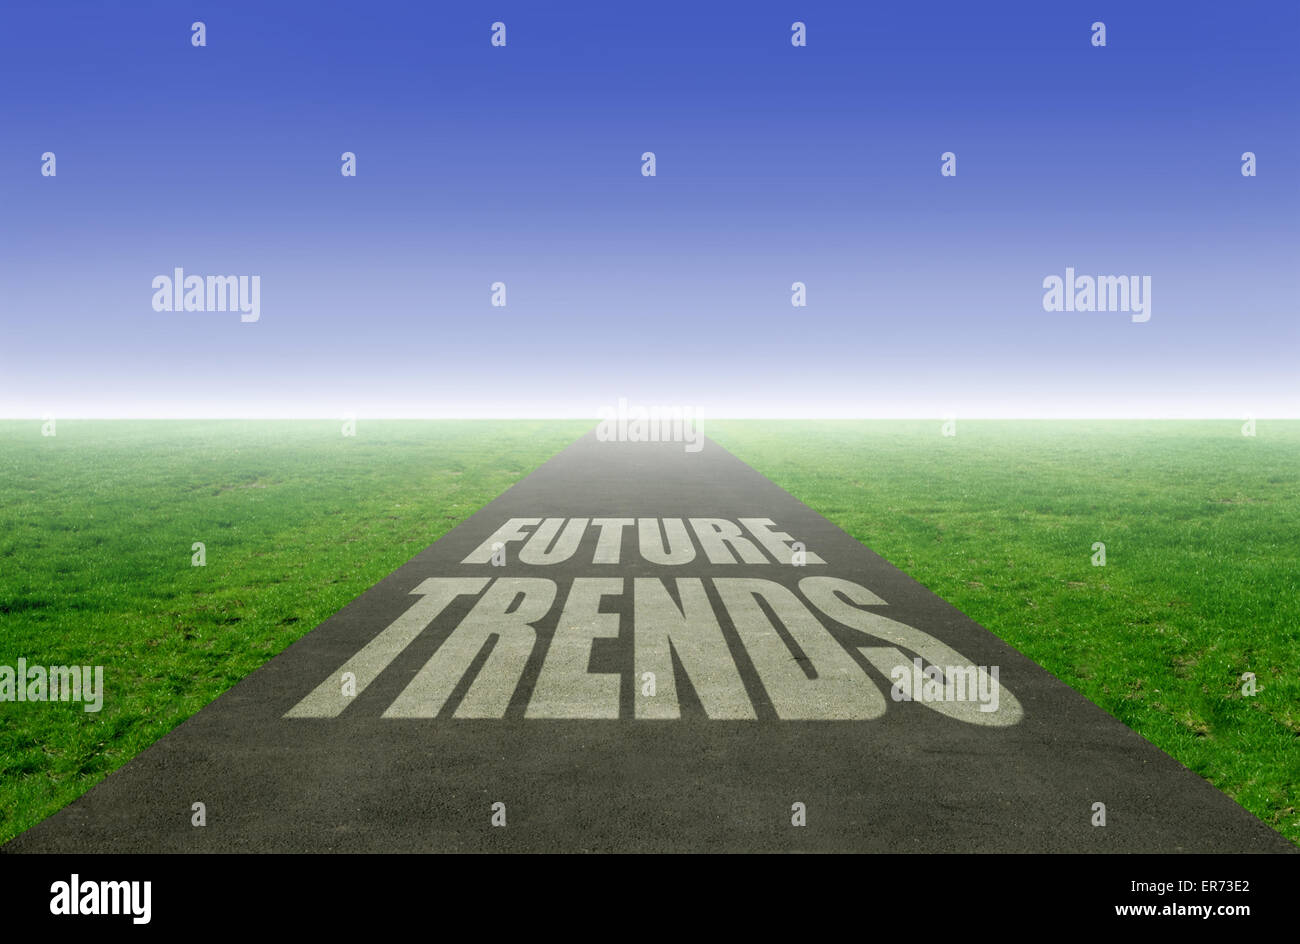 Emerging trends hires stock photography and images Alamy